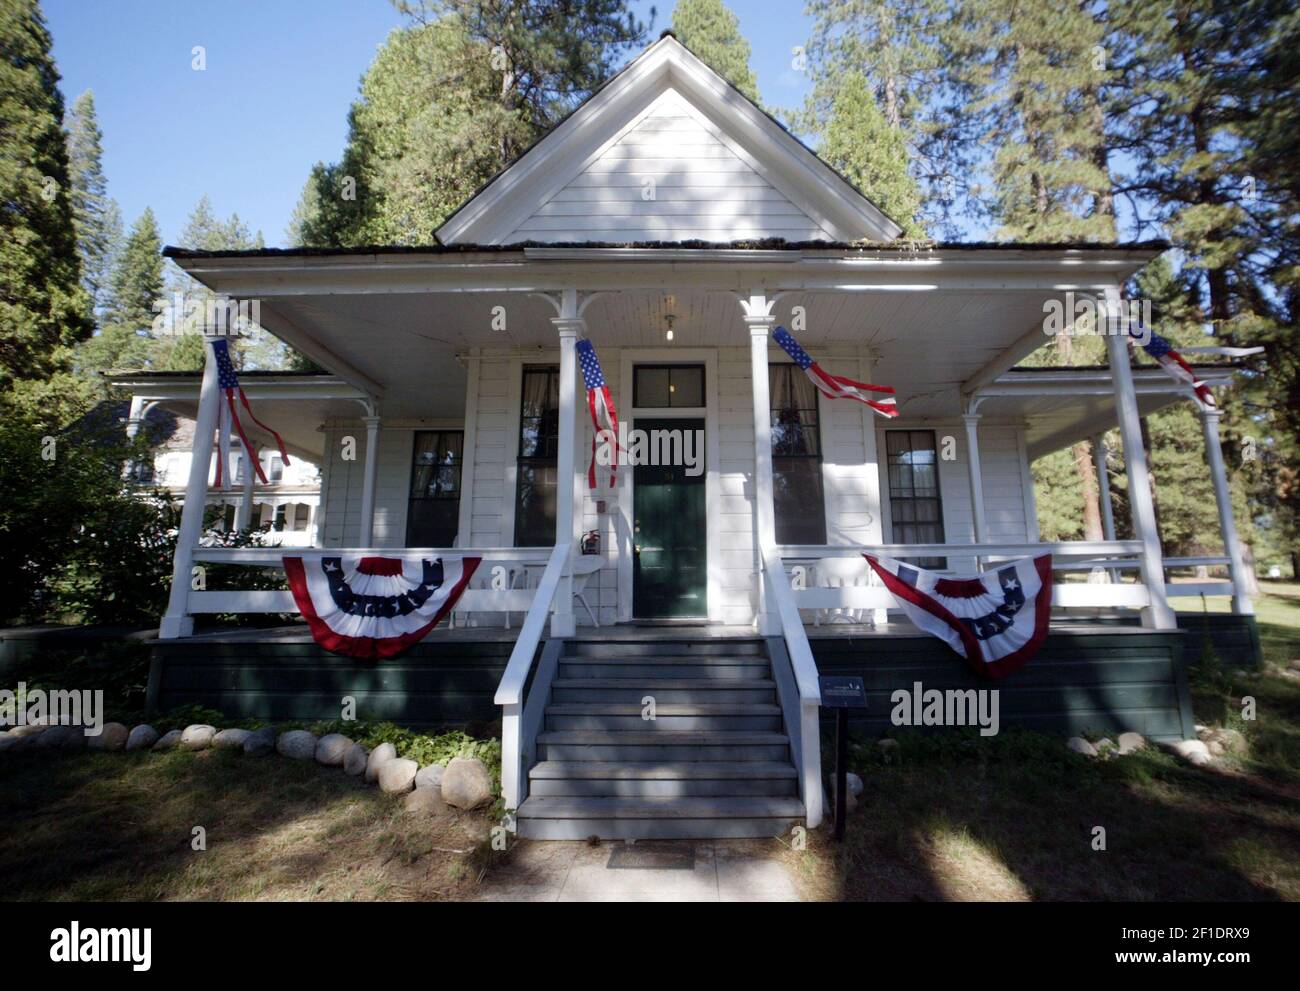 A cottage at the Wawona Hotel in Yosemite, Calif., in July 2007. Yosemite National Park, currently shuttered amid the Coronavirus pandemic, received approximately 4.6 million visitors in 2019. (Photo by Darrell Wong/Fresno Bee/TNS/Sipa USA) Stock Photo